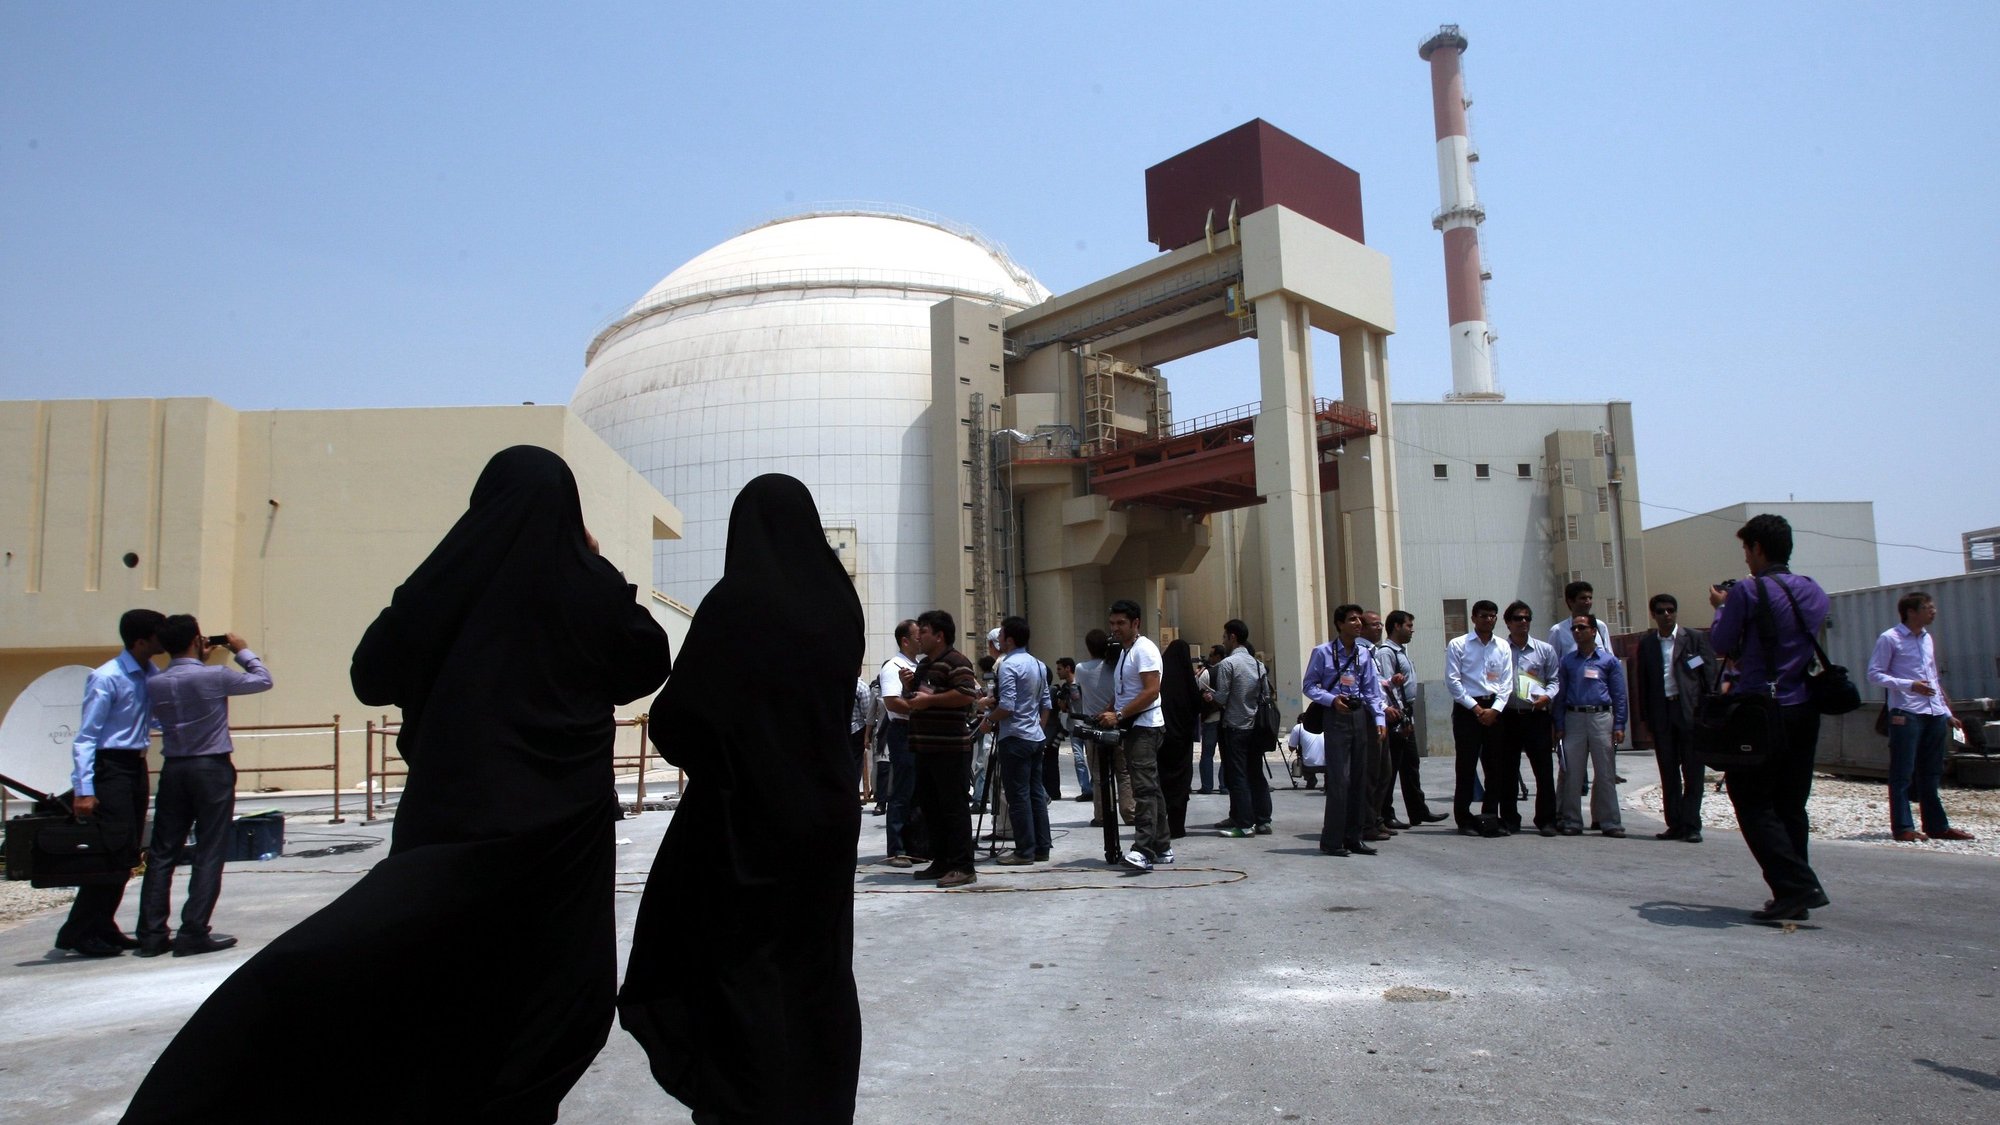 epa05070462 (FILE) A file picture dated 21 August 2010 shows Iranian security officials of the Bushehr nuclear plant wearing the Islamic black gown (Chador), looking at members of the media in front of the plant in Bushehr, southern Iran. Media reports on 15 December 2015 state that the 35 countries on the governing board of the International Atomic Energy Agency (IAEA) unanimously took note of the agency&#039;s recent final report on its inquiry, which found that Iran had conducted various nuclear weapons research projects that have now ended.  EPA/ABEDIN TAHERKENAREH *** Local Caption *** 52054293